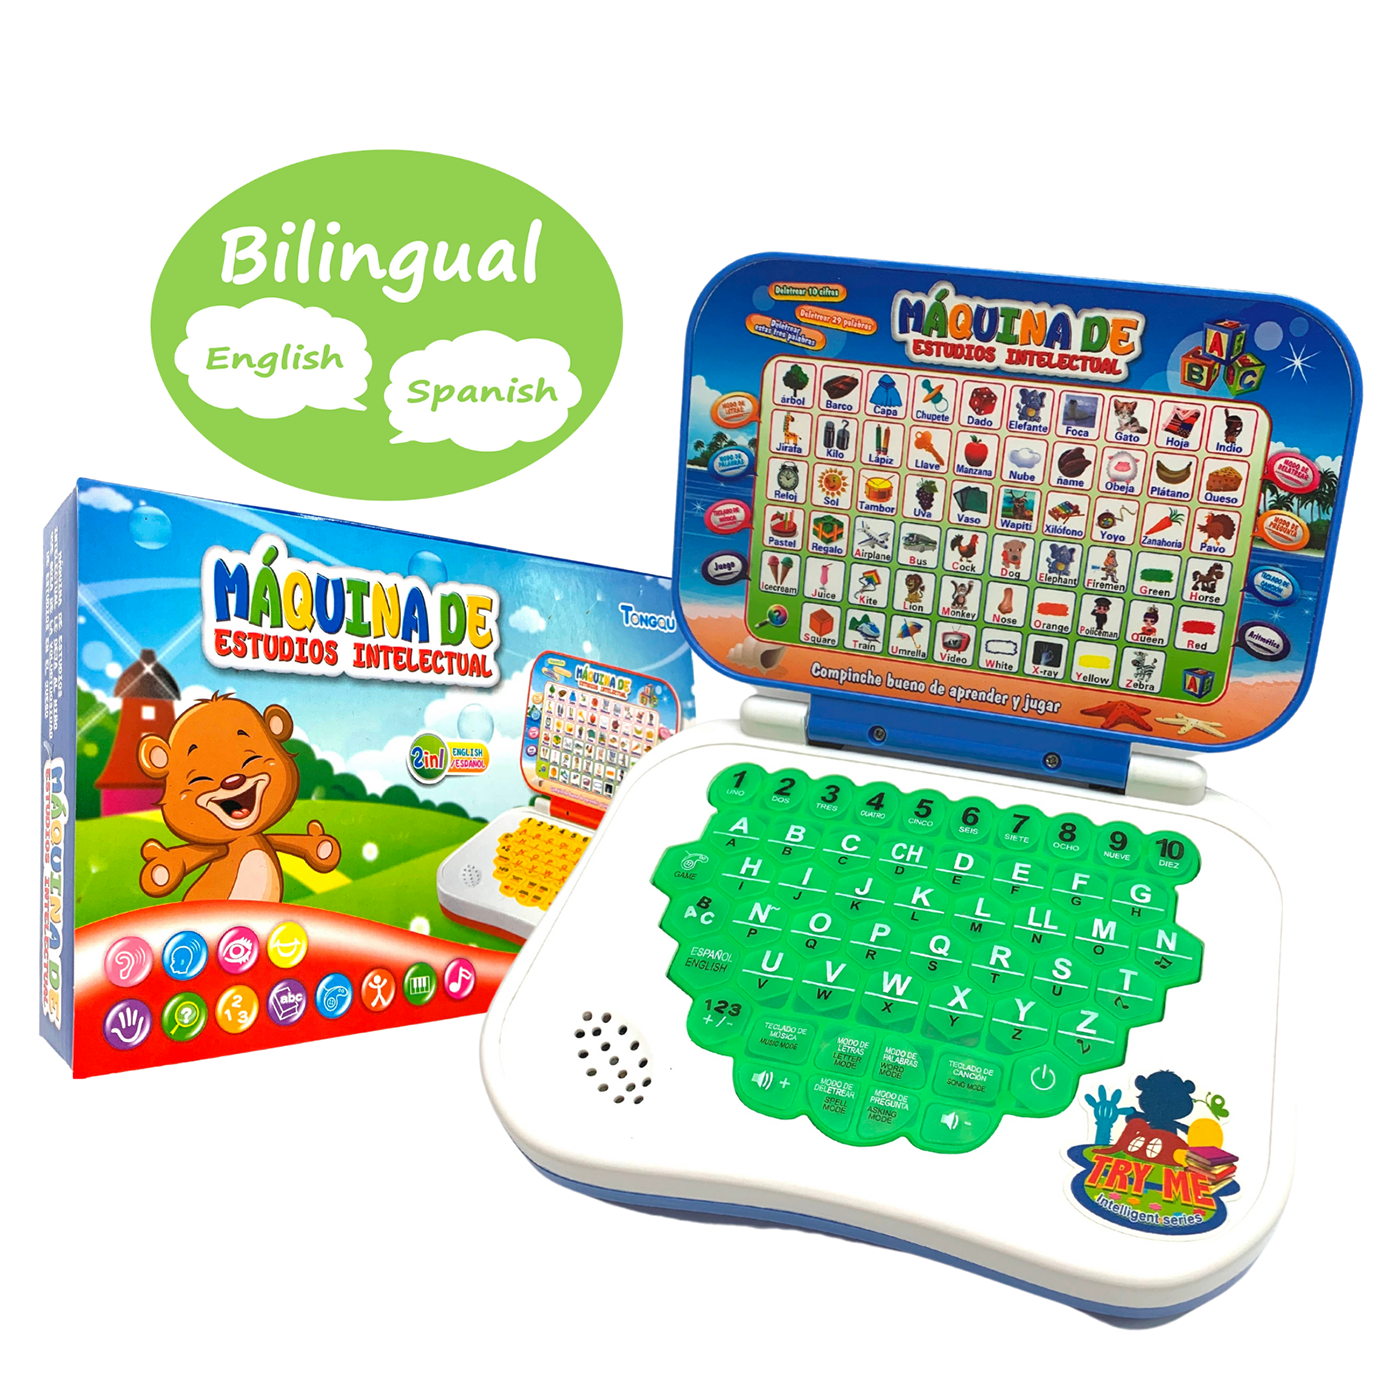 Spanish-english Tablet Bilingual Educational Toy LCD Screen Display Learning 2 for sale online 